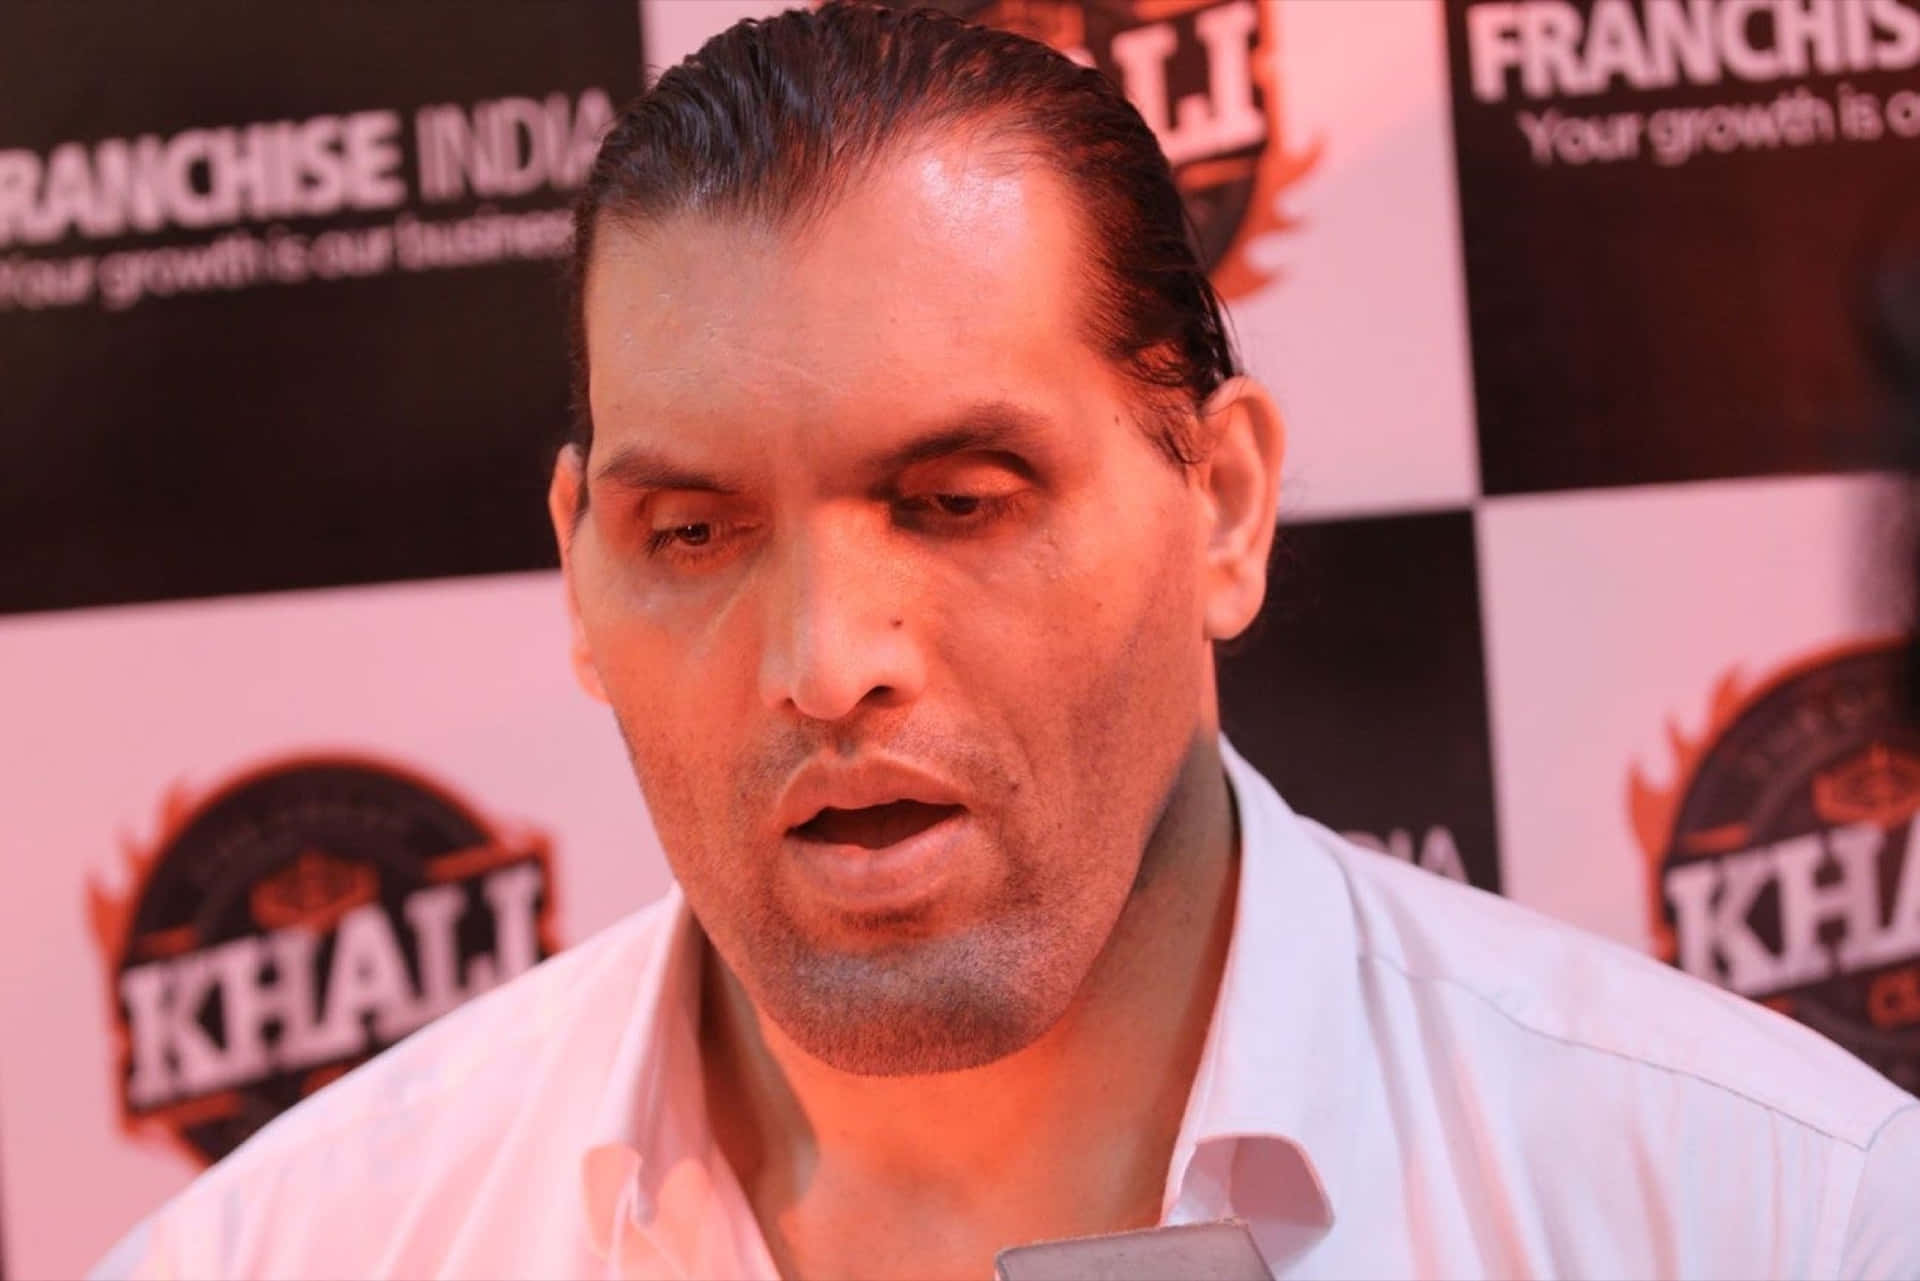 The Great Khali displays an intense expression during a wrestling match. Wallpaper